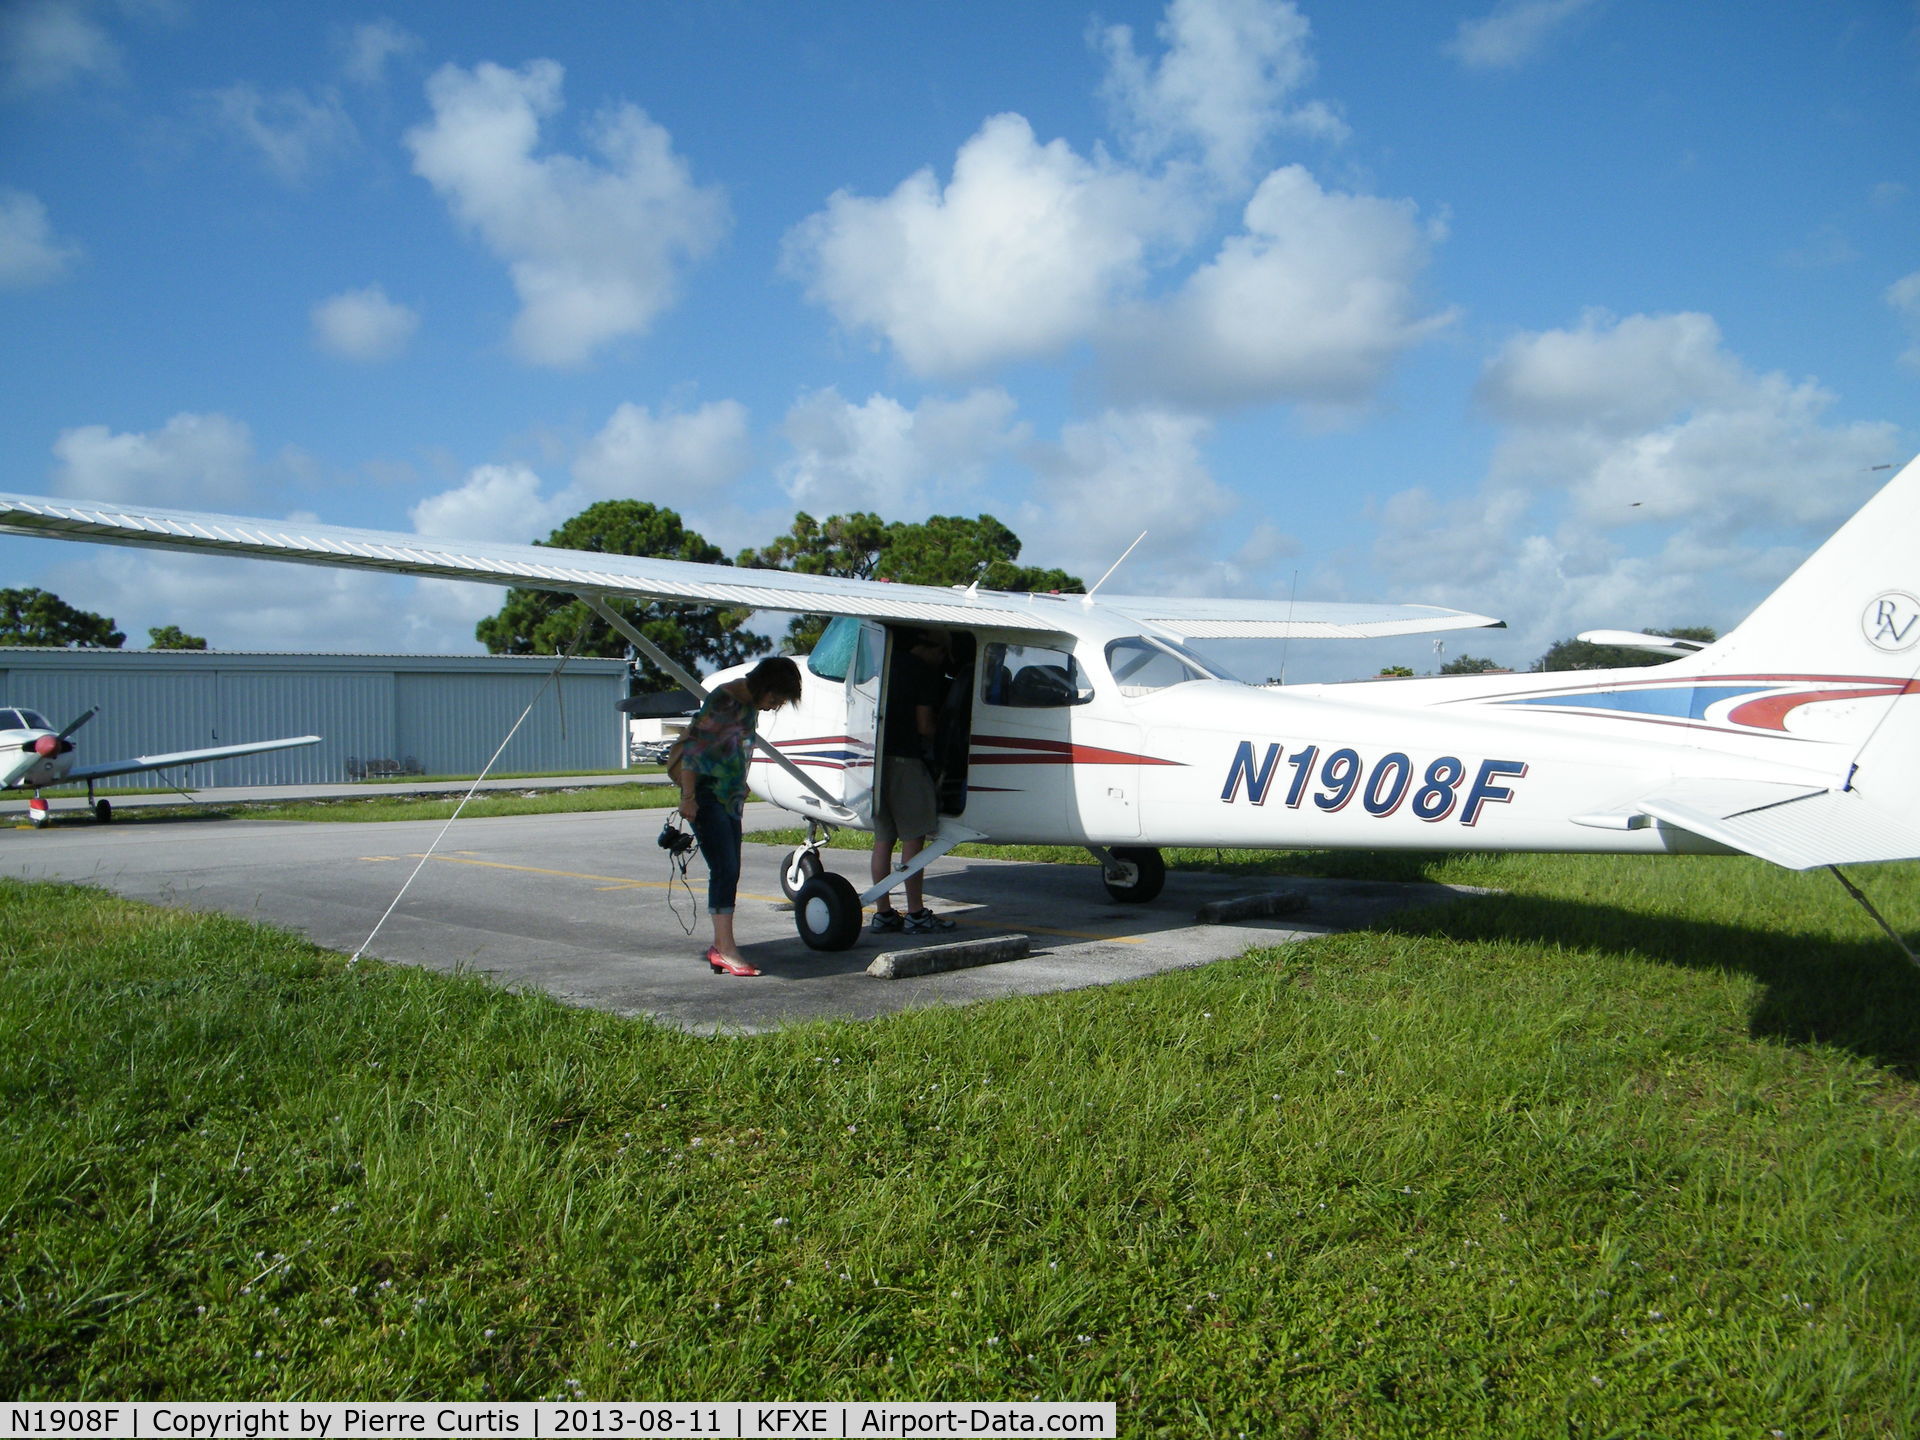 N1908F, 1973 Cessna 172M C/N 17256493, Taken 11th Aug 2013 at Ft Lauderdale Executive Airport.